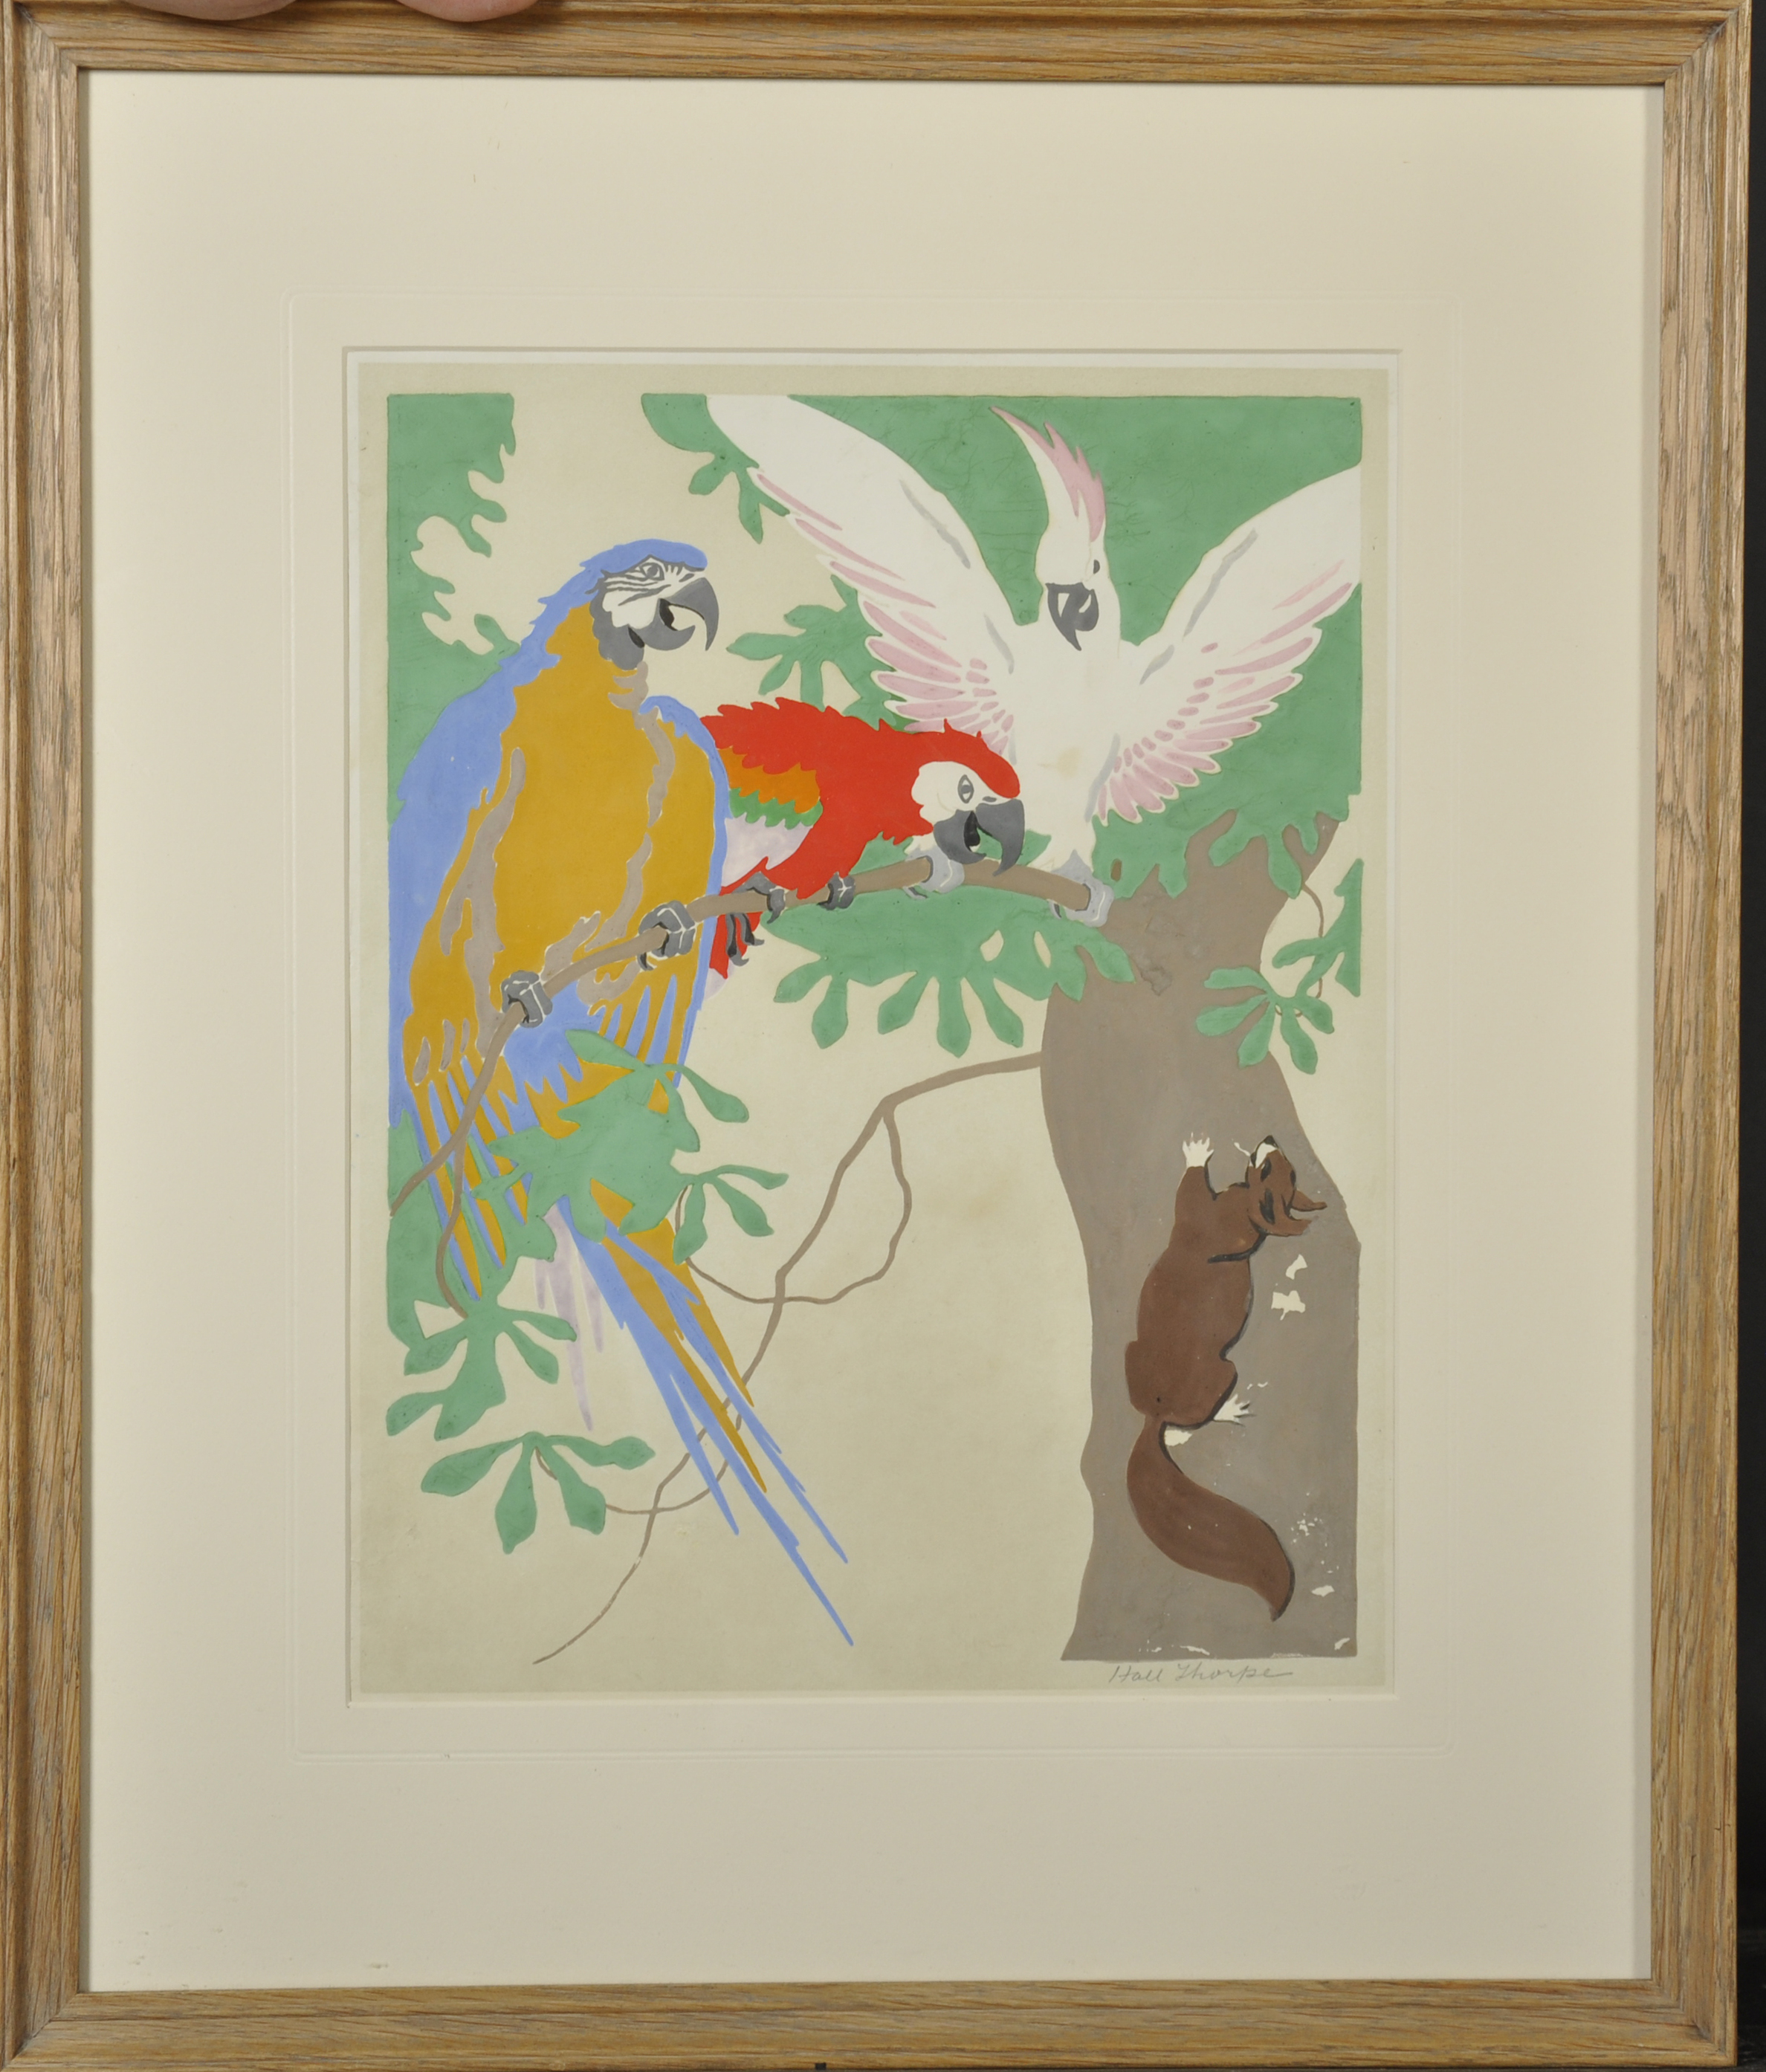 John Hall Thorpe (1874-1947) Australian. "Parrots", with Two Parrots, a Cockatoo and a Squirrel, a - Image 2 of 4